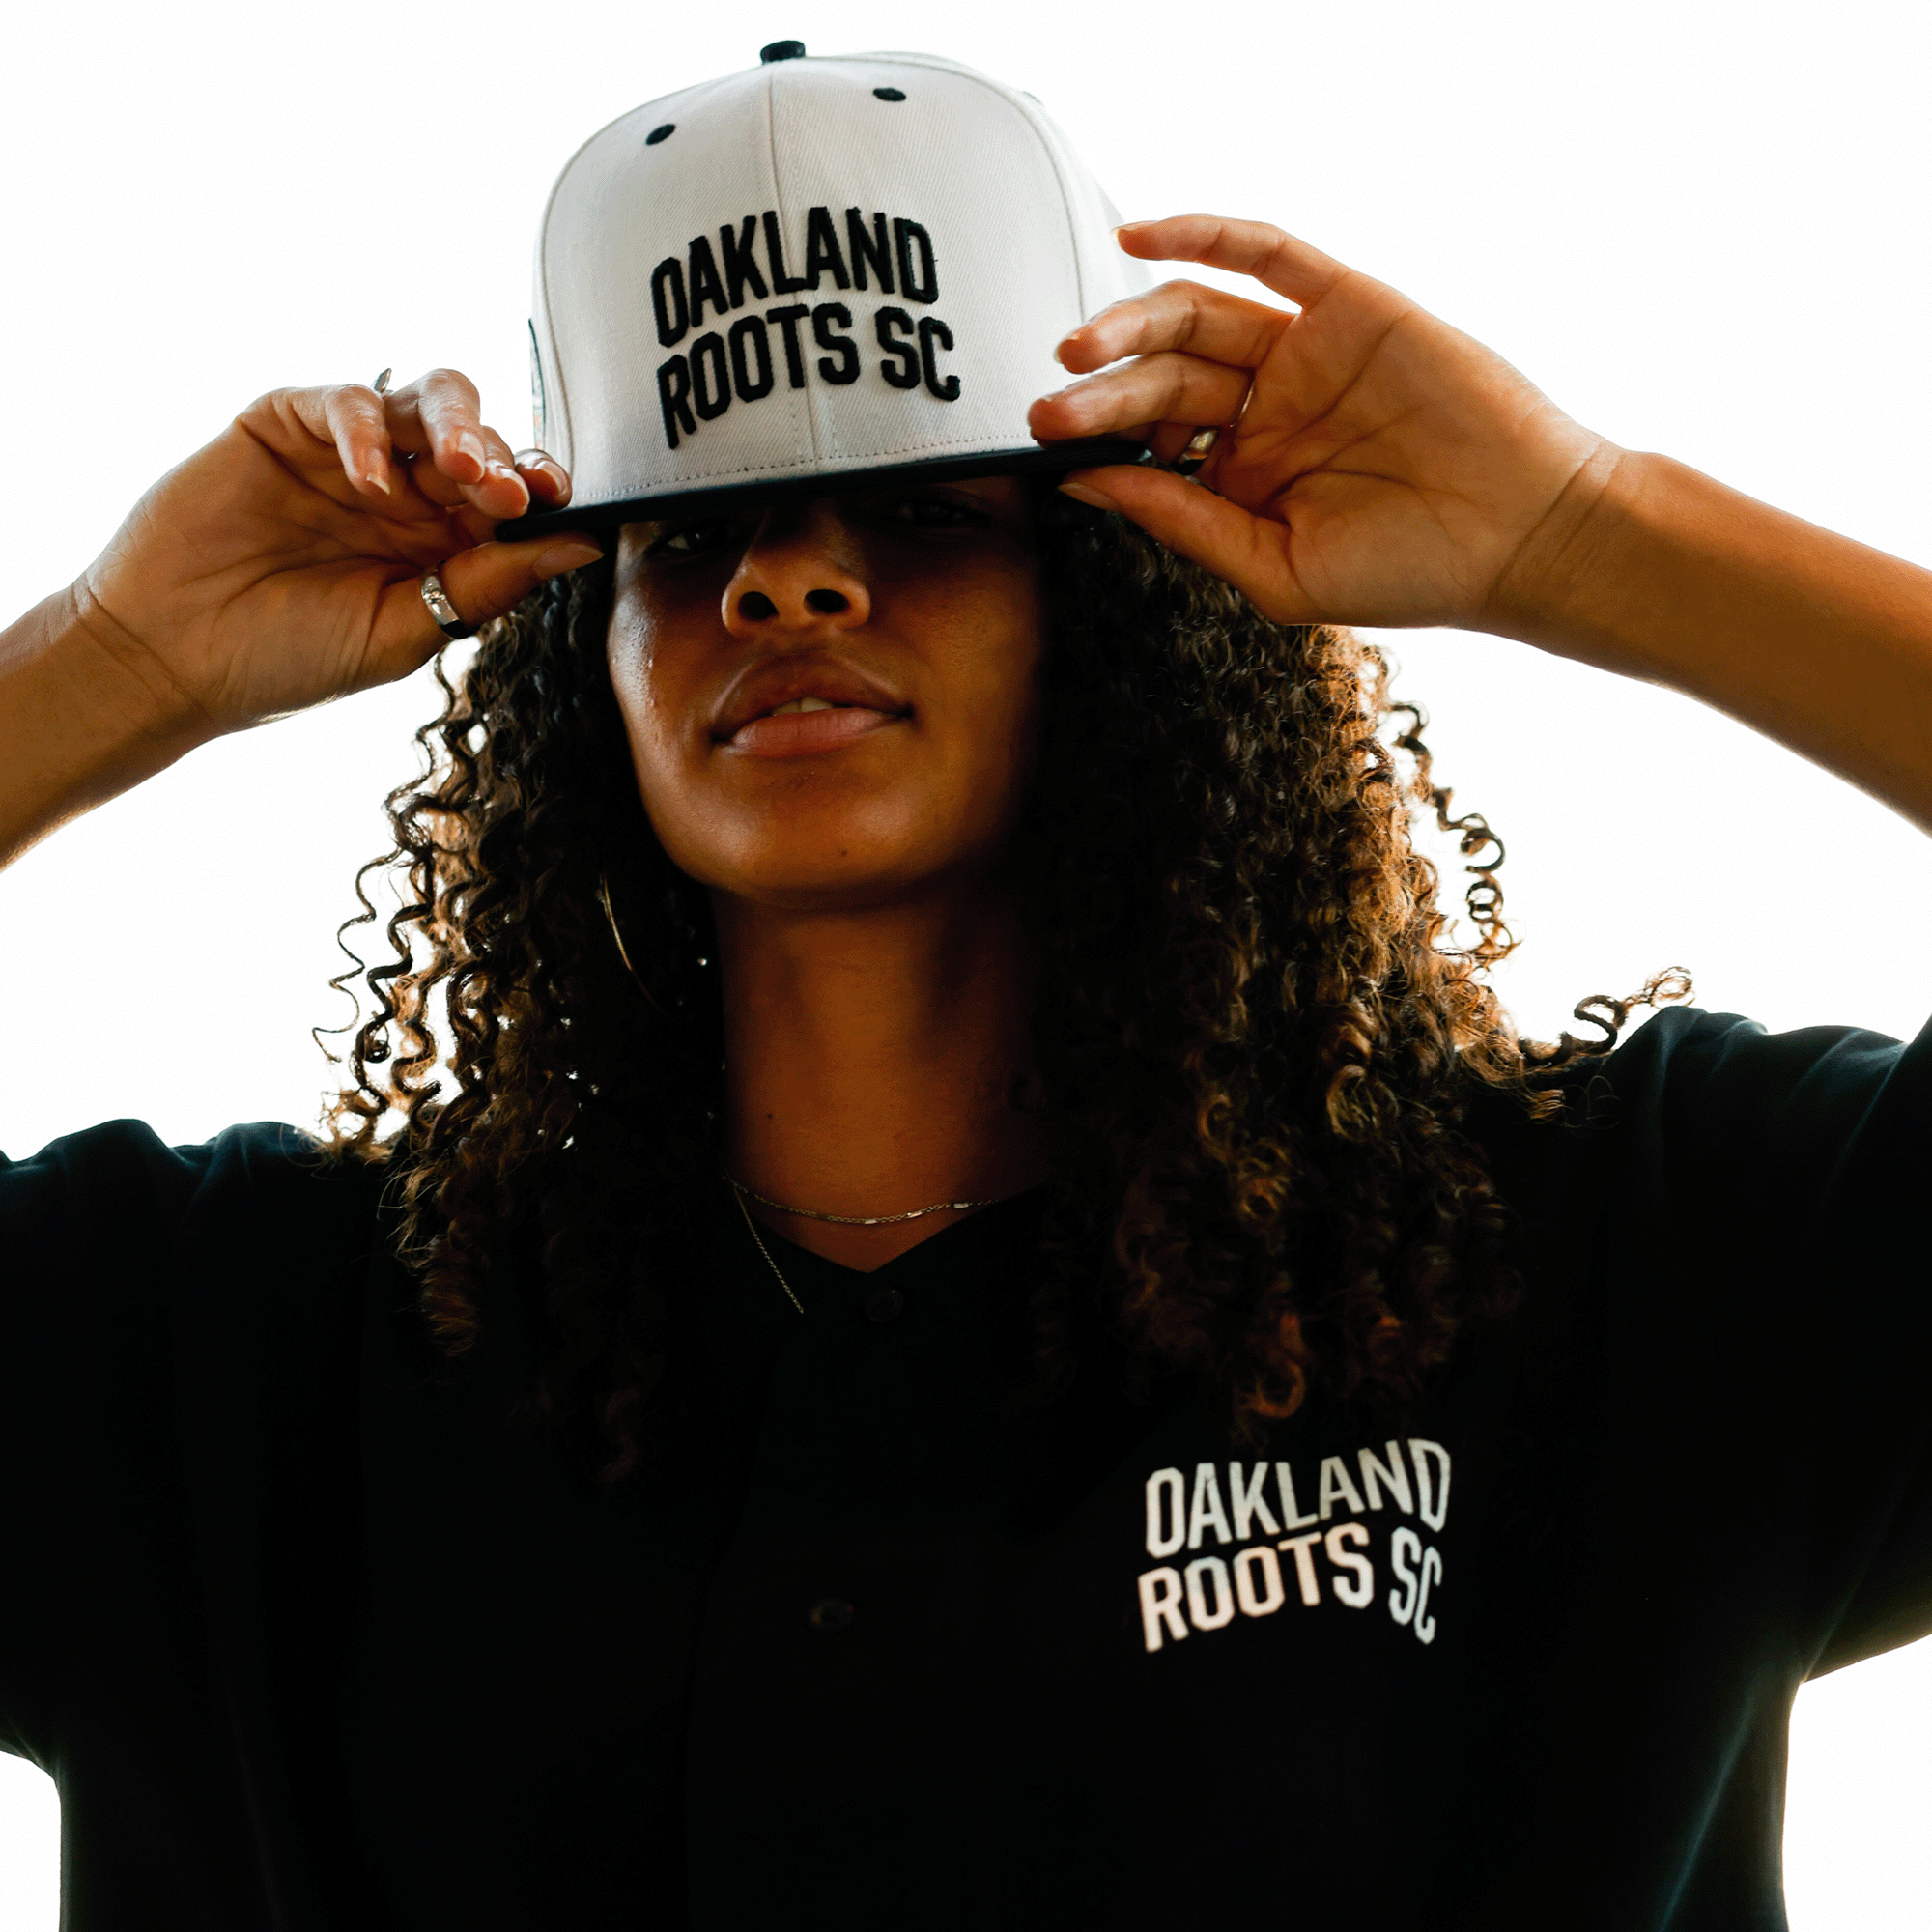 Woman wearing white hat with black embroidered Oakland Roots SC wordmark on the crown and black Oakland Roots SC t-shirt.